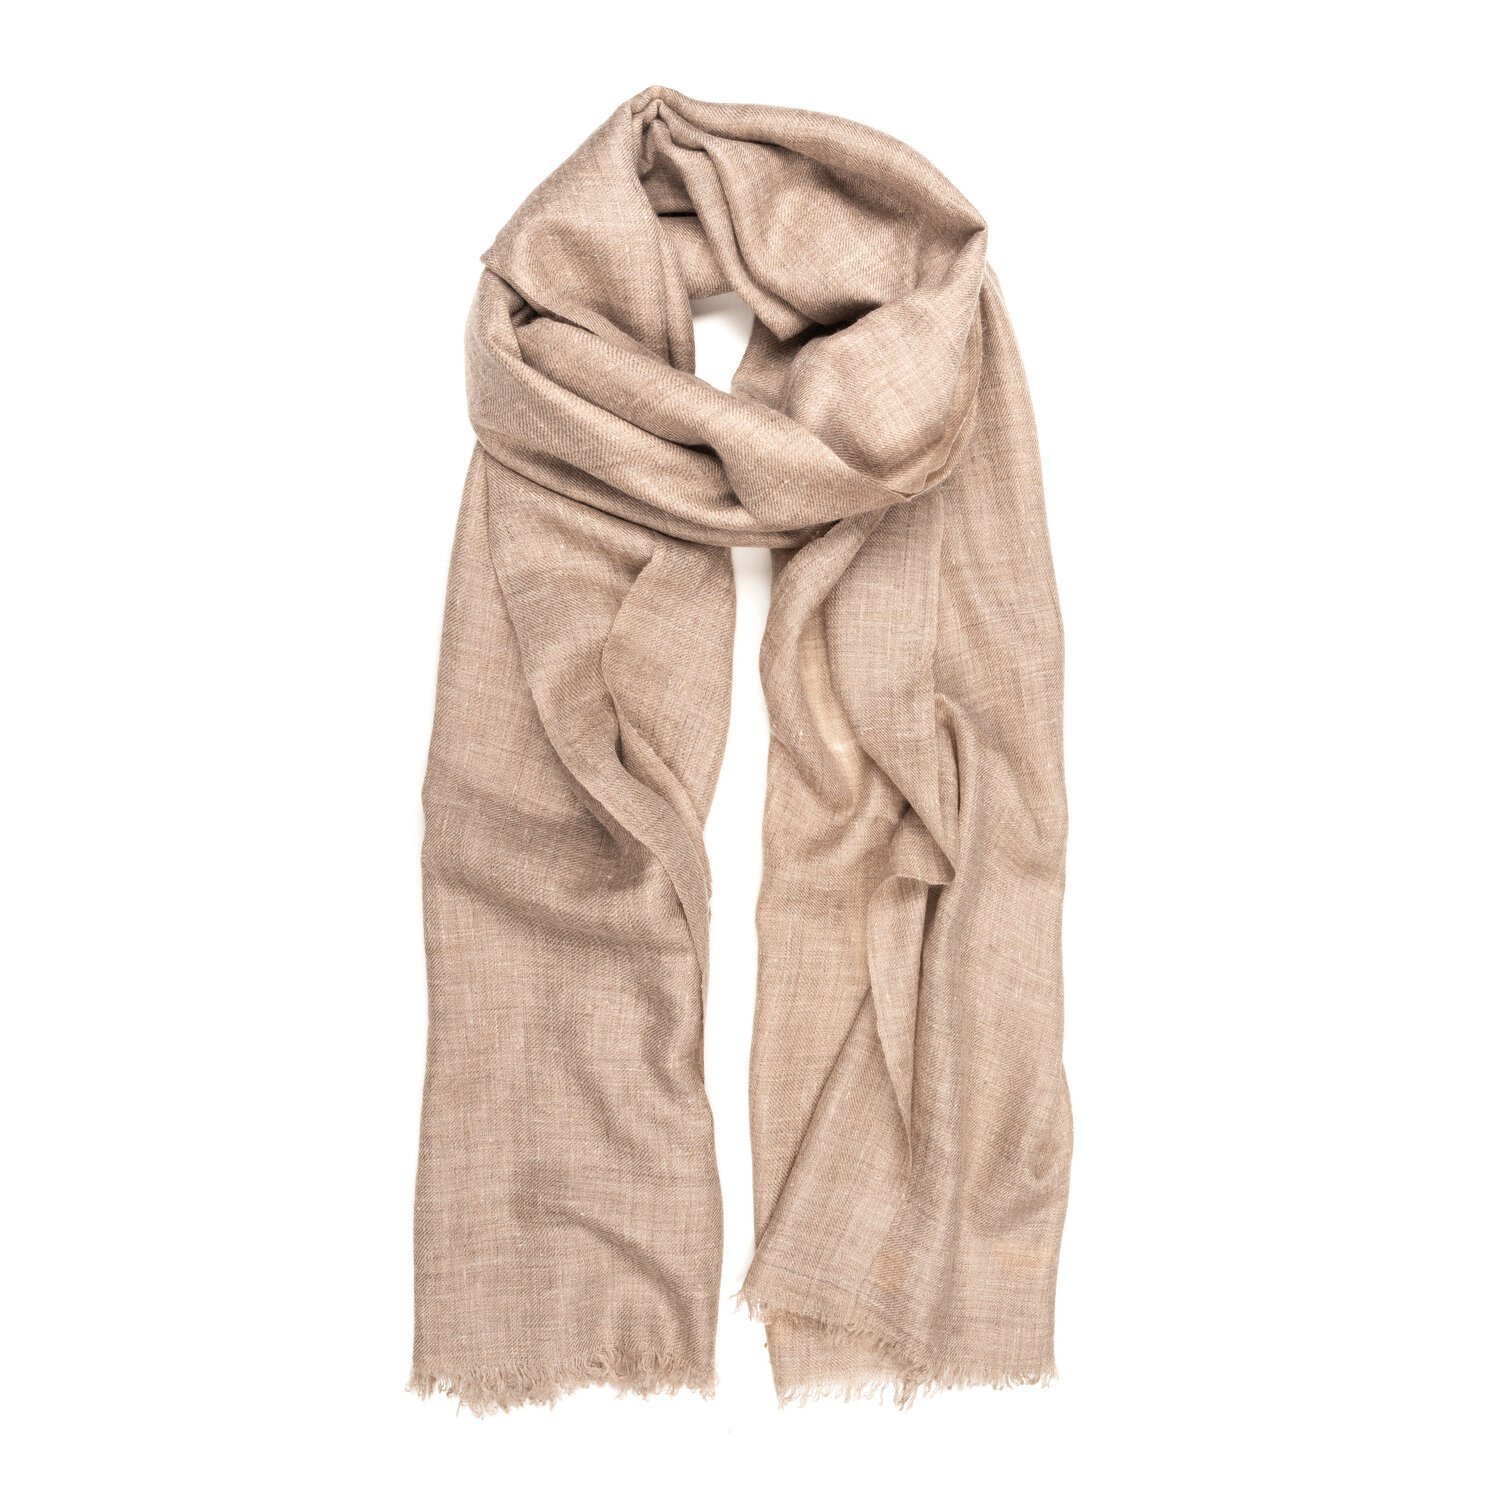 Pop London ethereal cashmere scarf.jpg